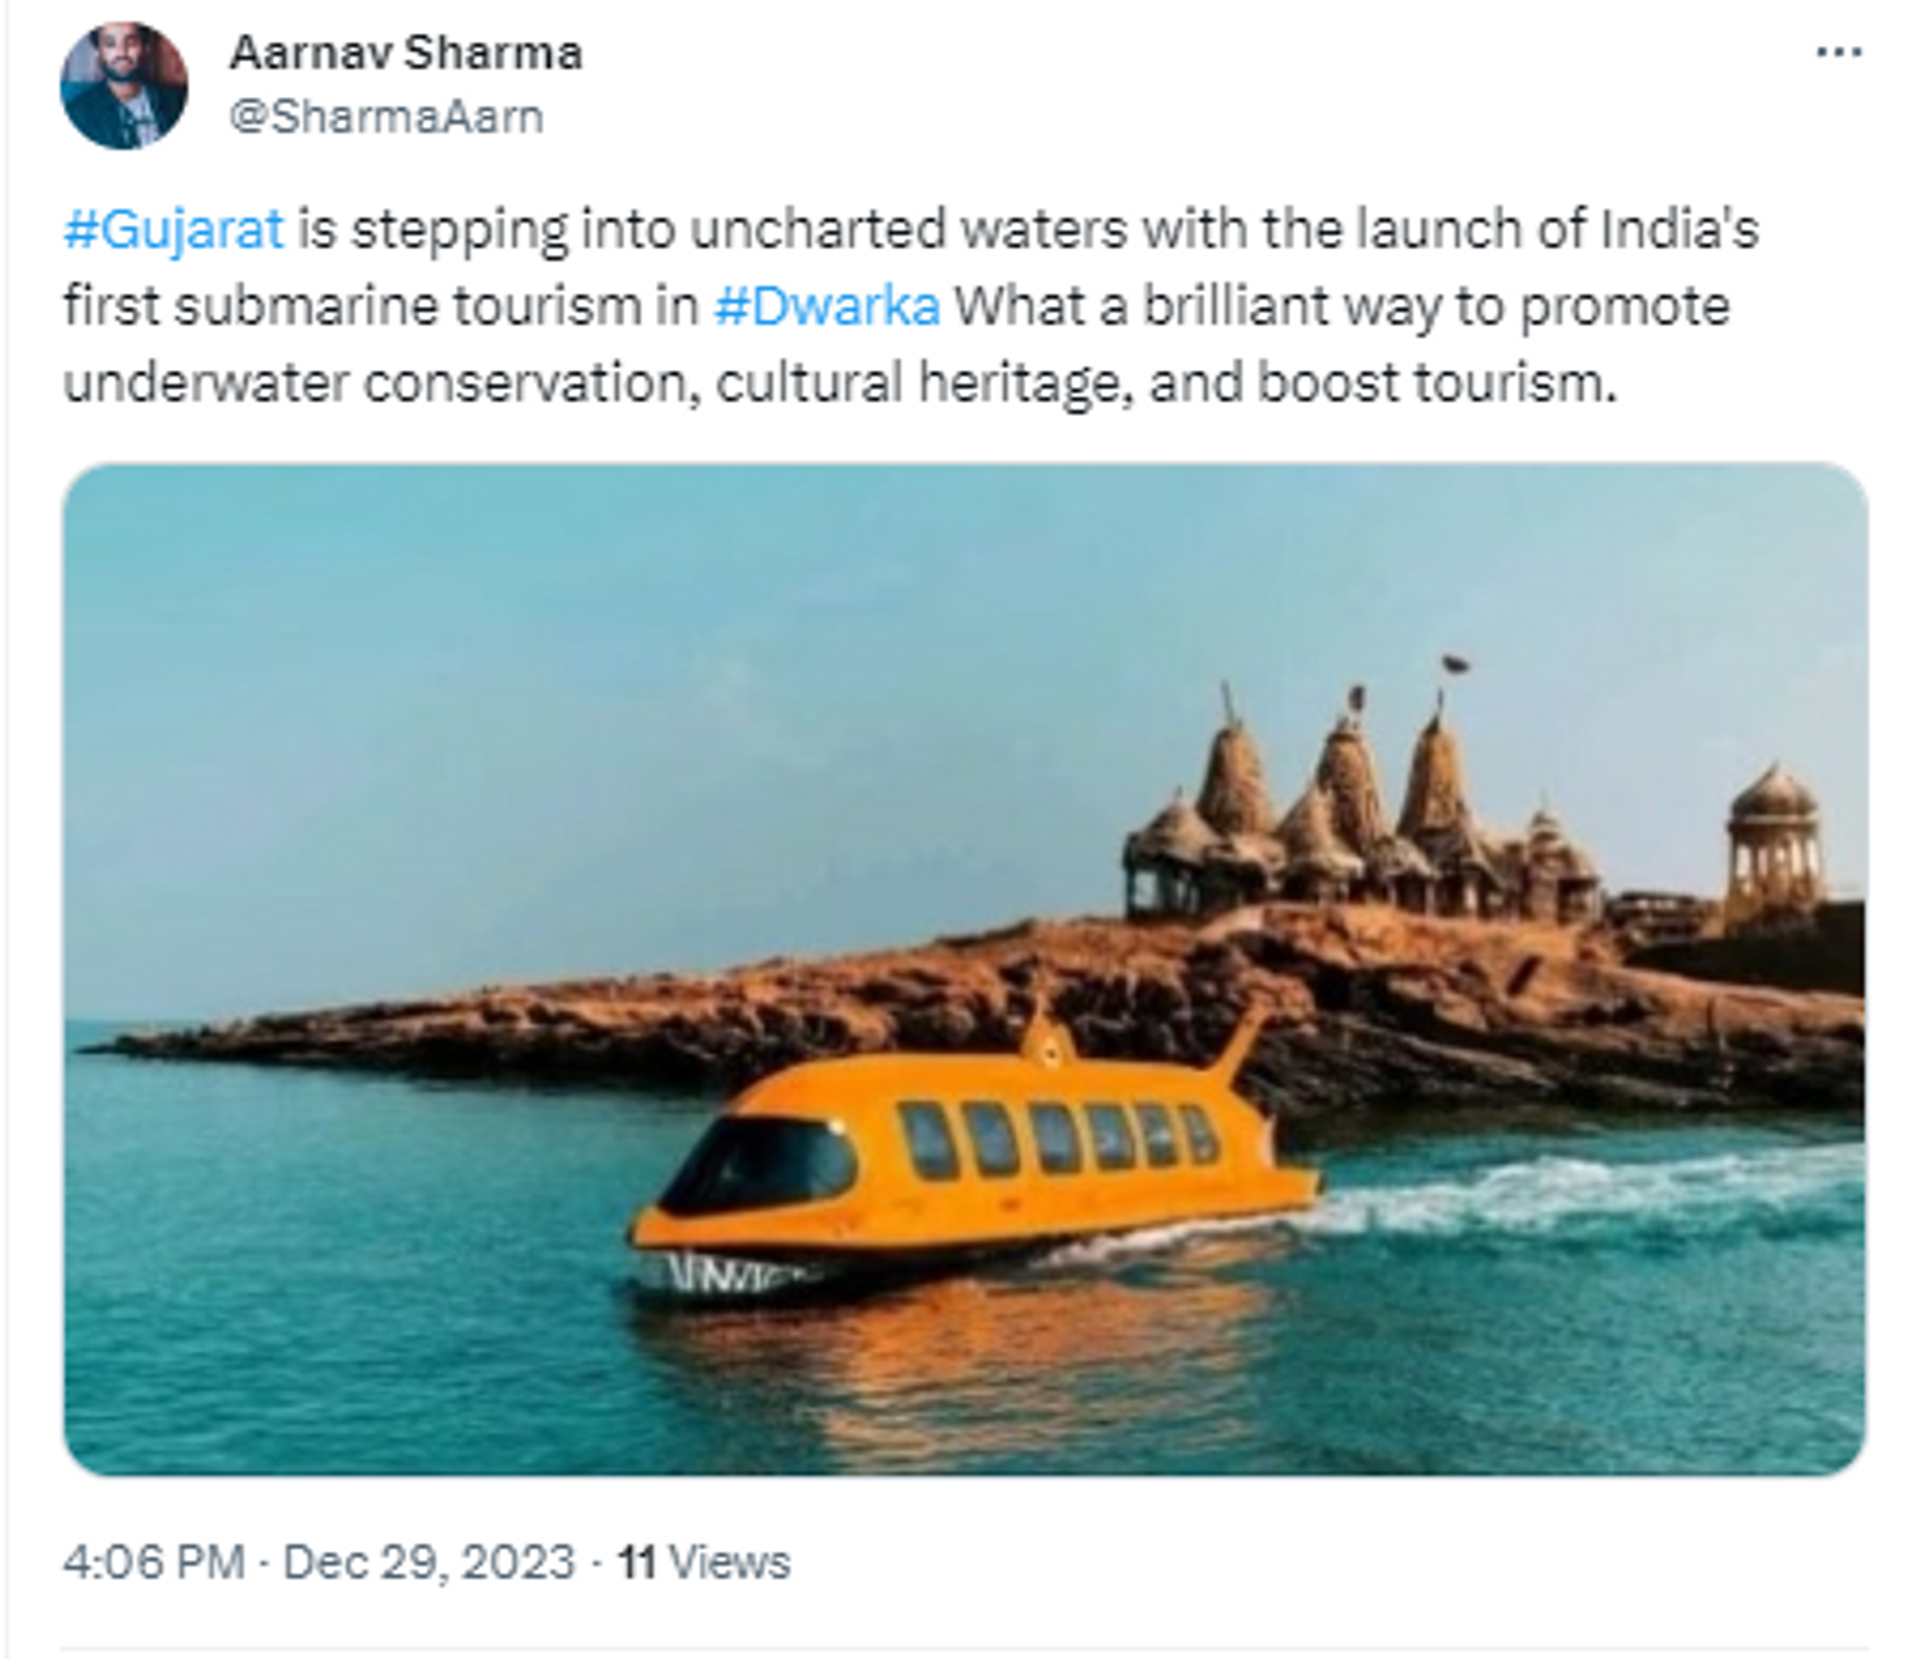 Gujarat to Launch India's First Submarine Tourism in Lost City of Dwarka - Sputnik India, 1920, 29.12.2023